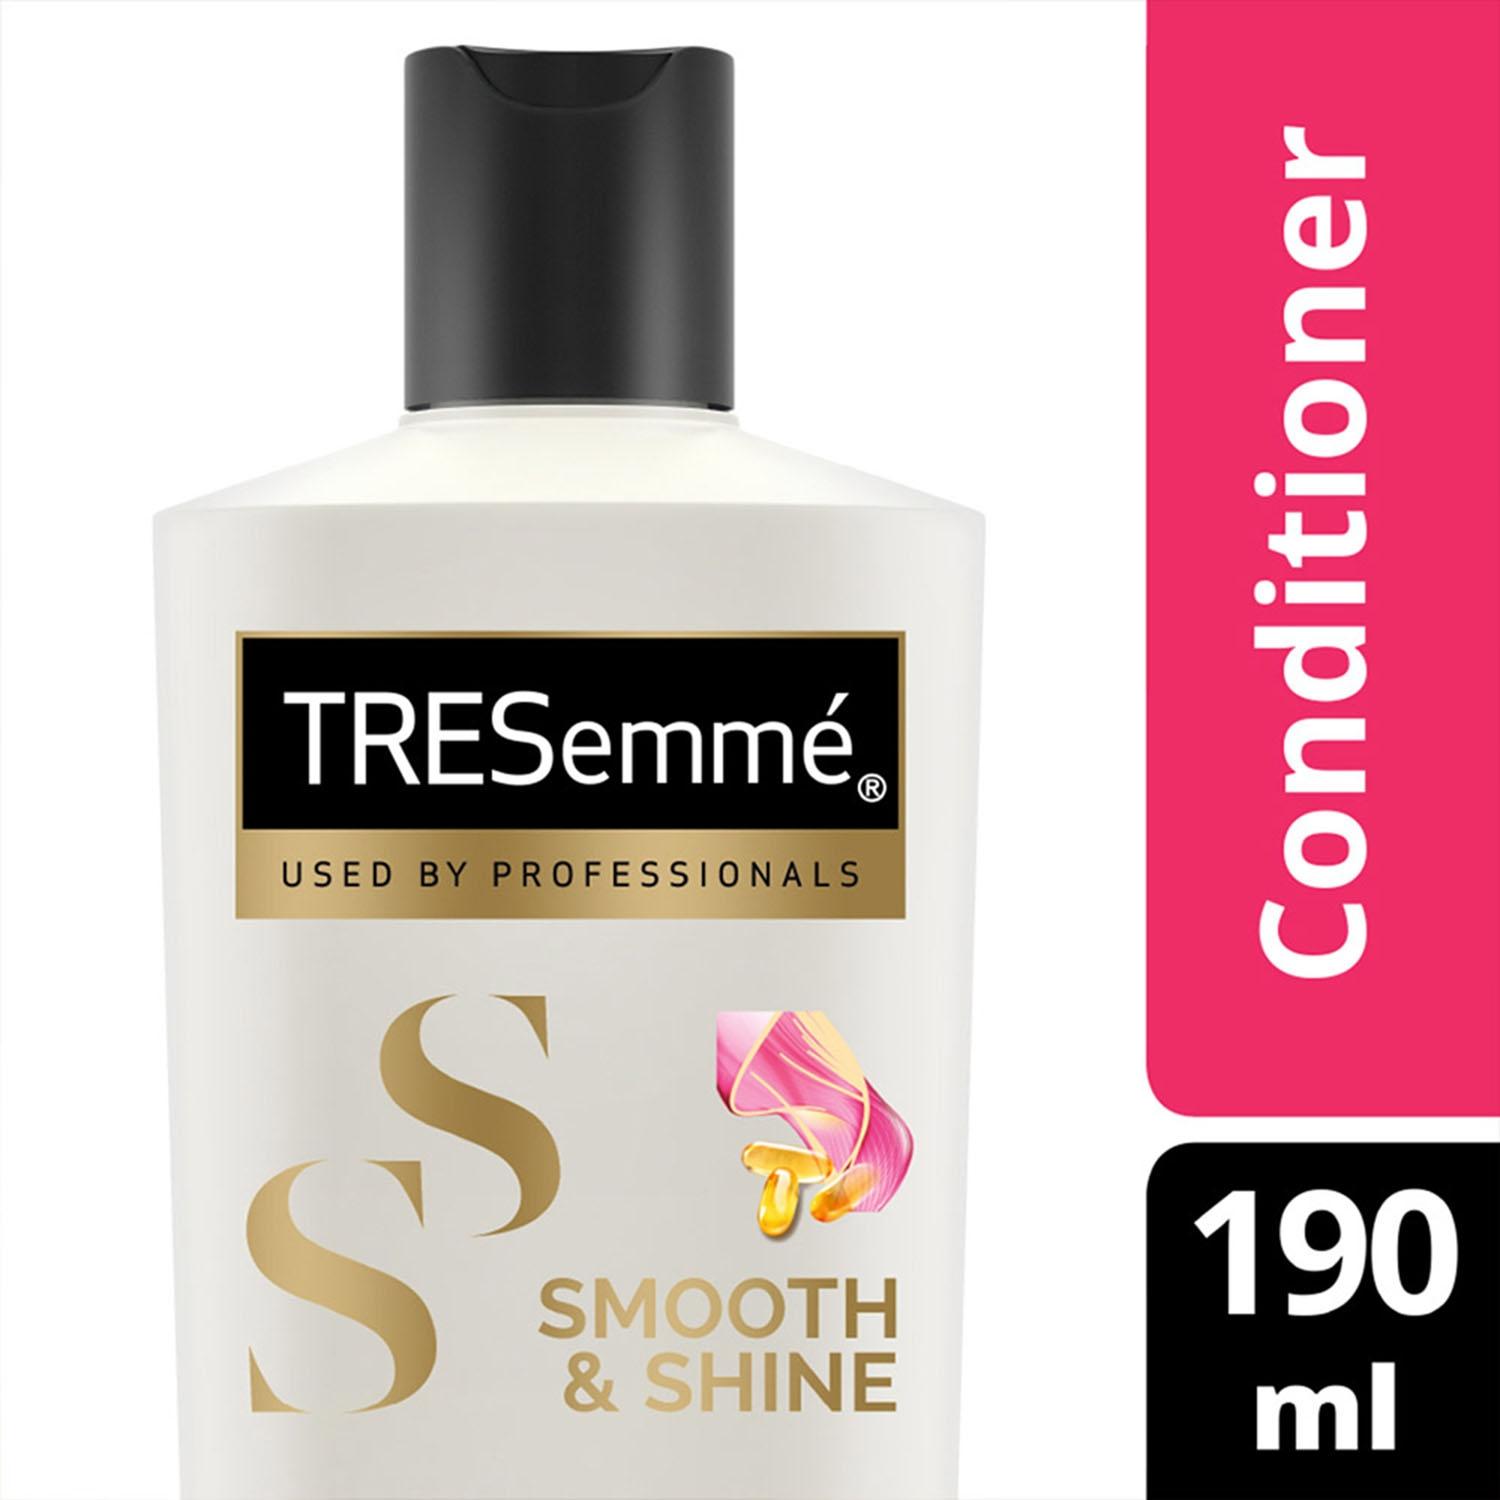 tresemme smooth & shine conditioner - (190ml)